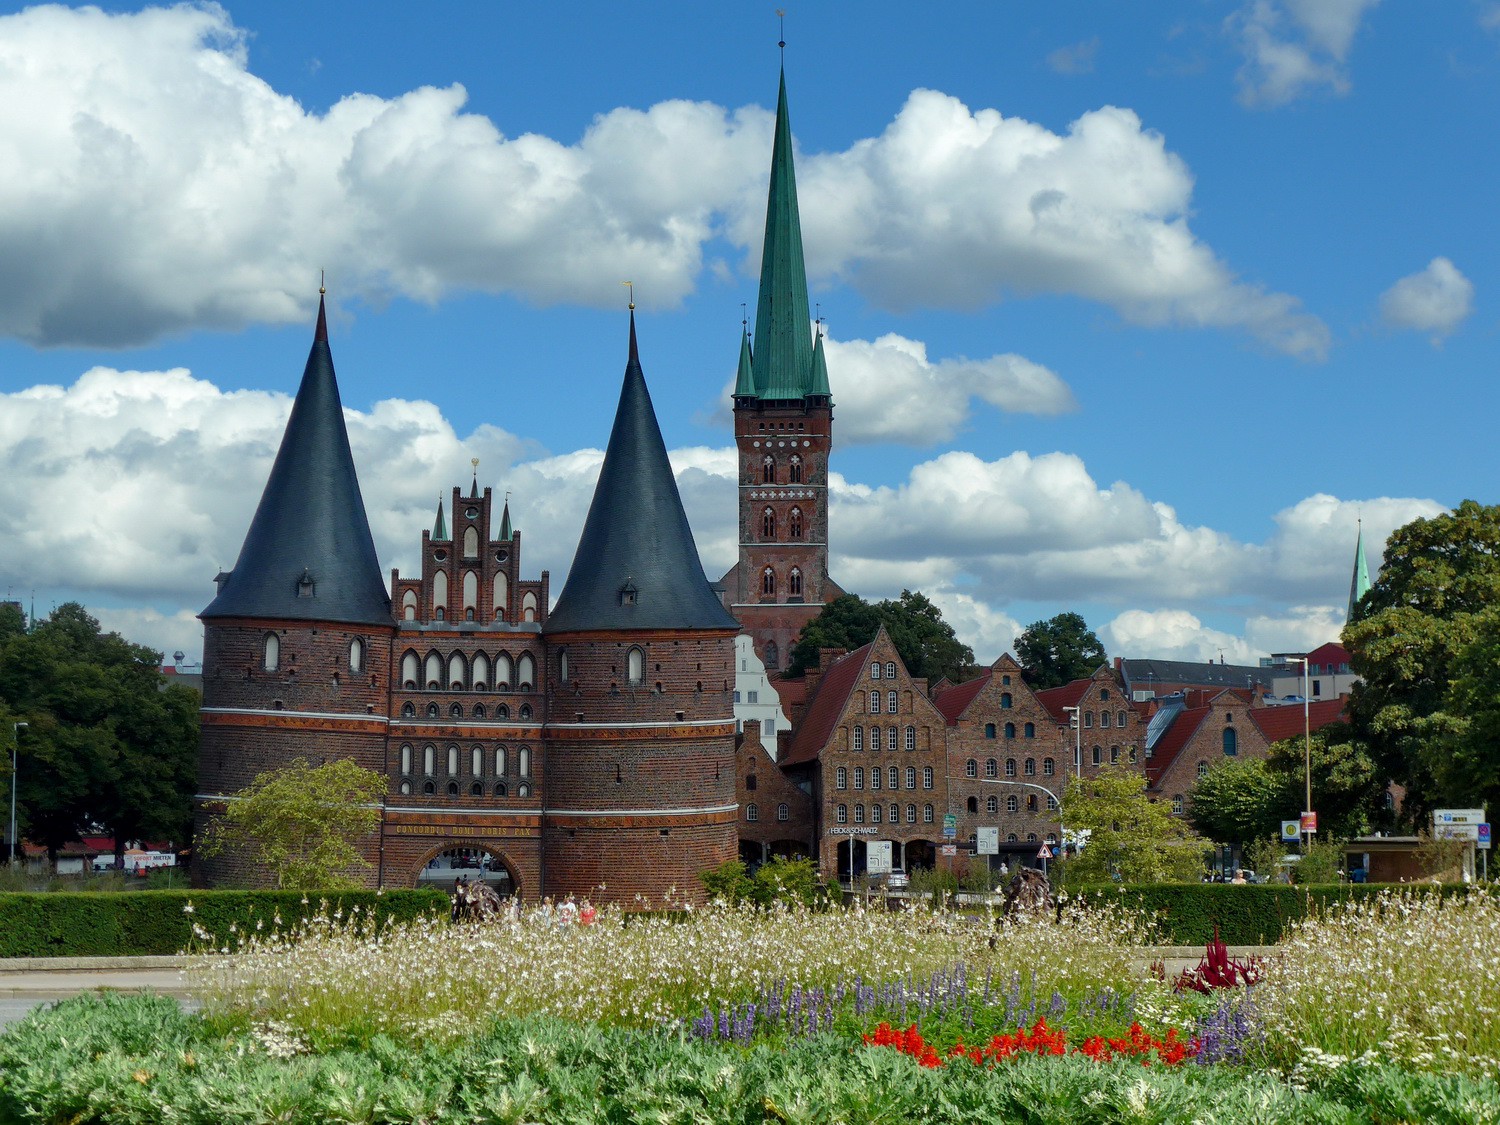 City gate Holstentor of Lübeck in northern Germany